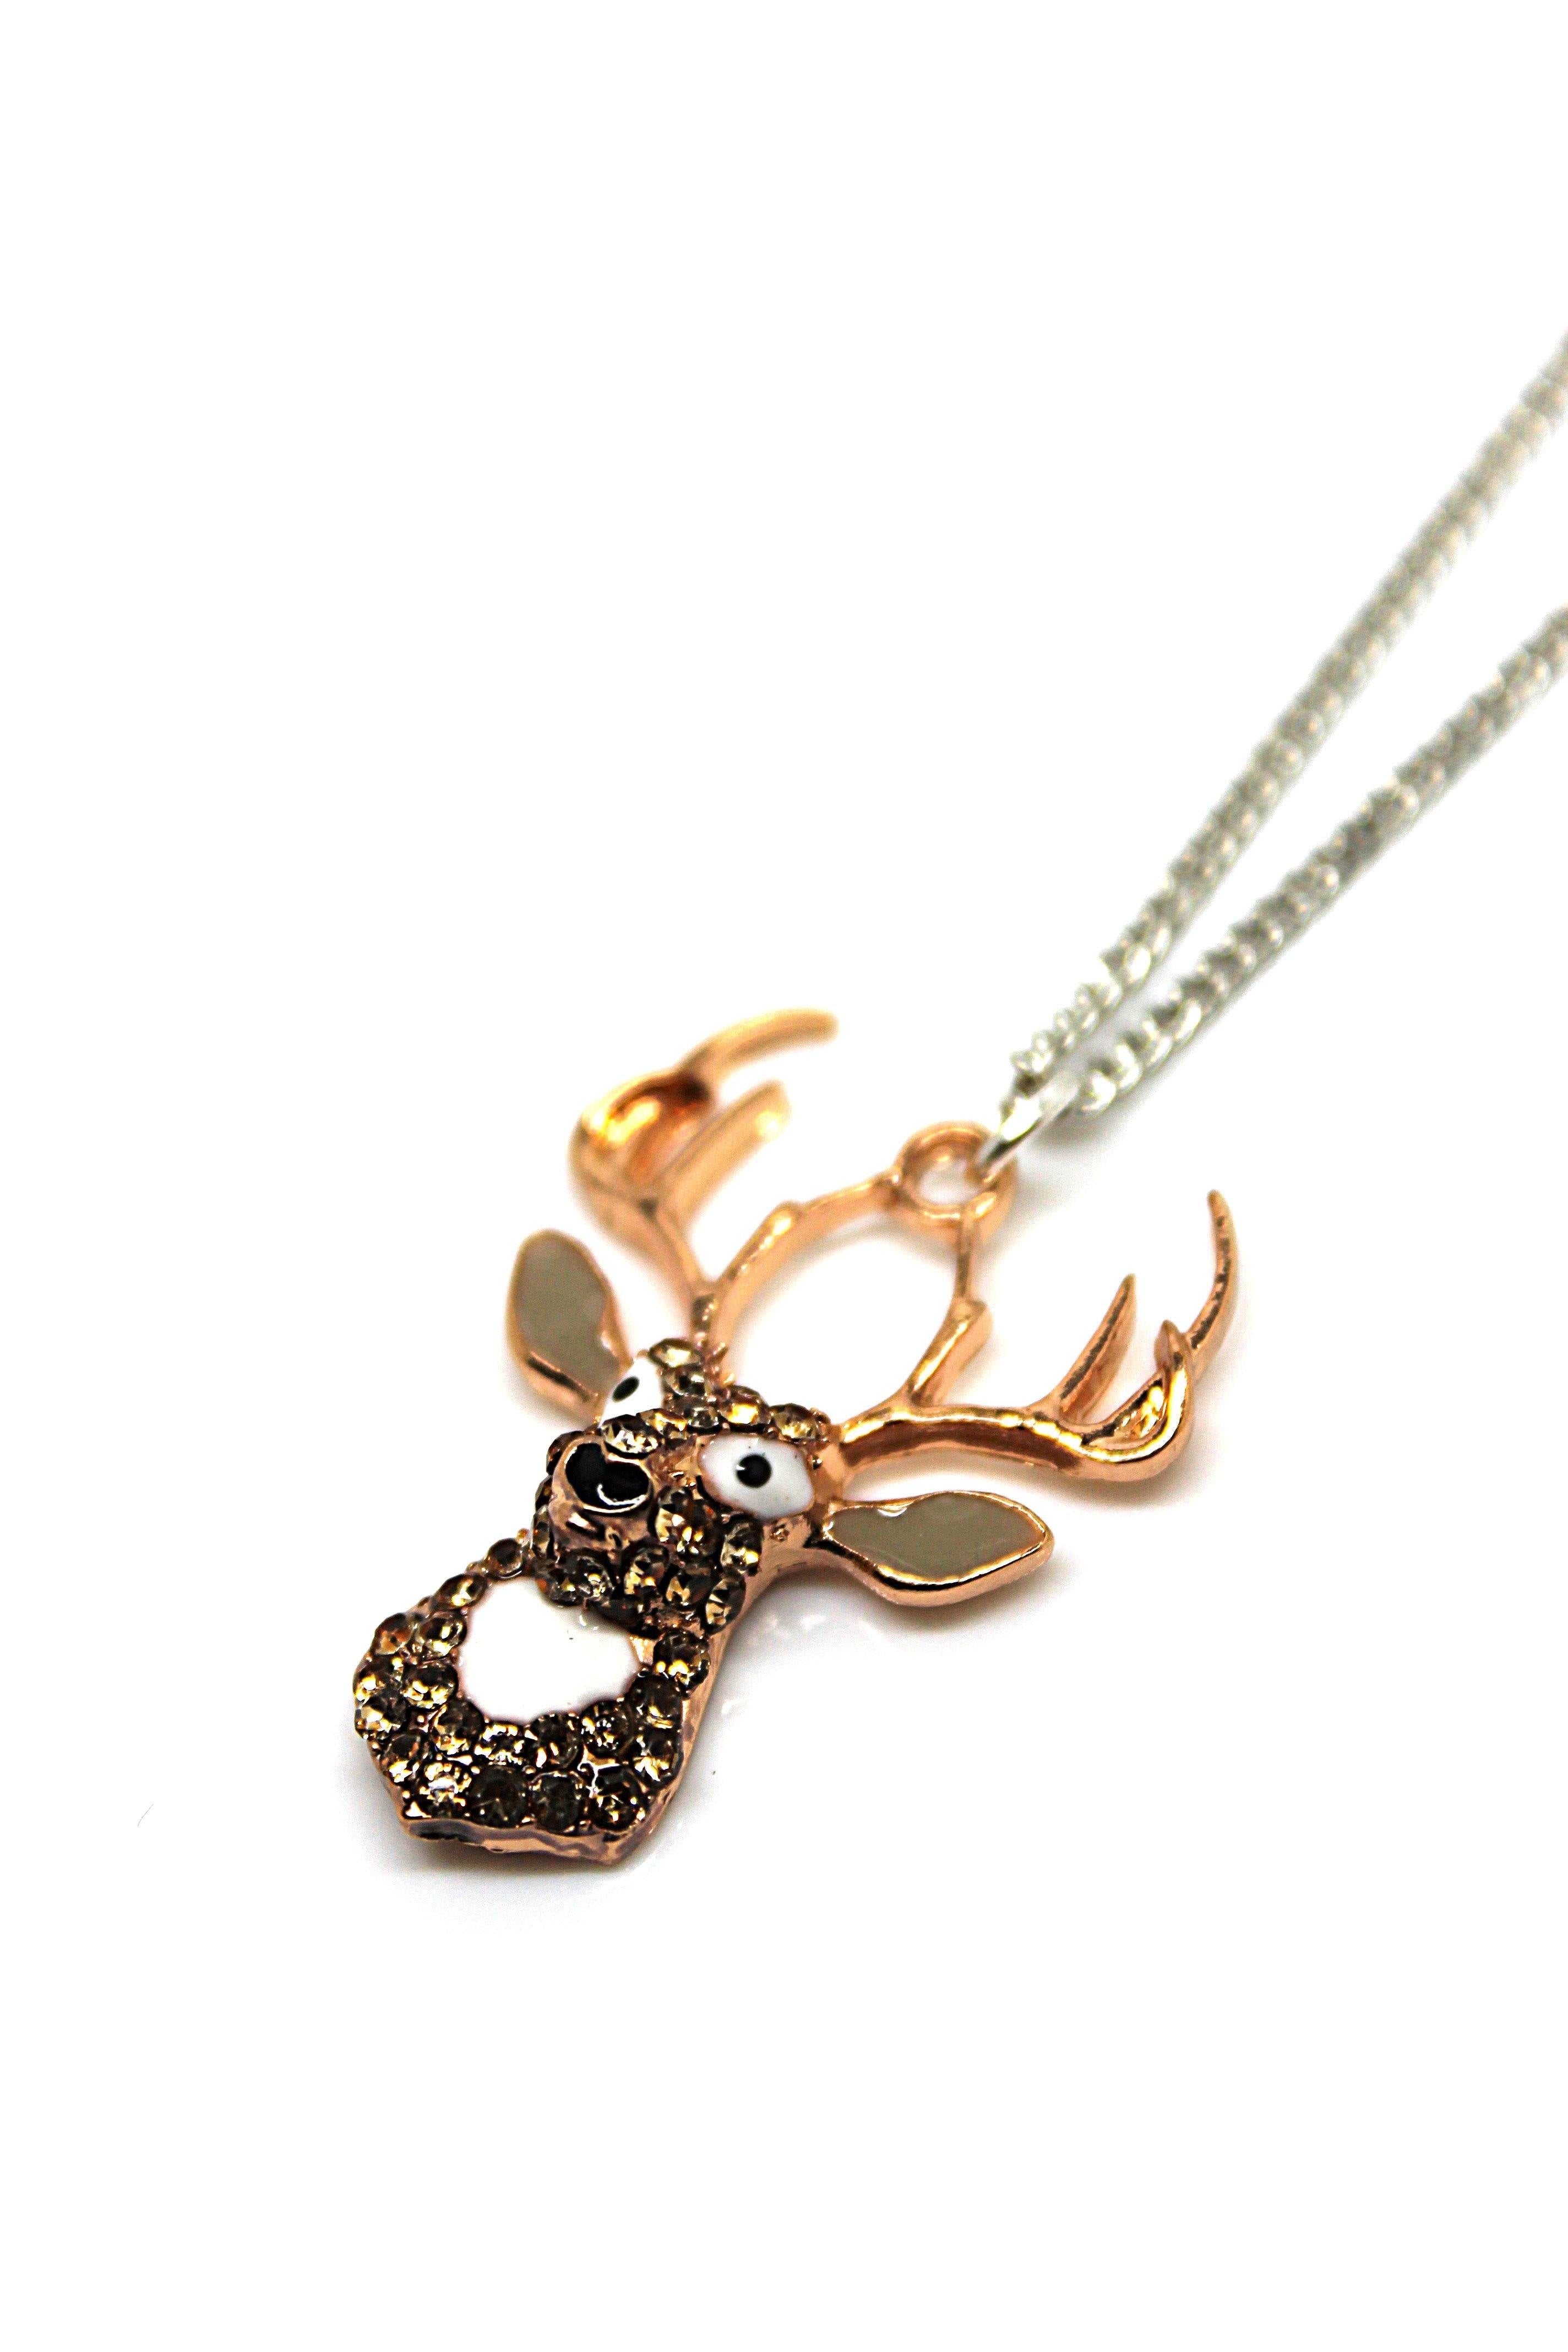 Stag Necklace - Wildtouch - Wildtouch